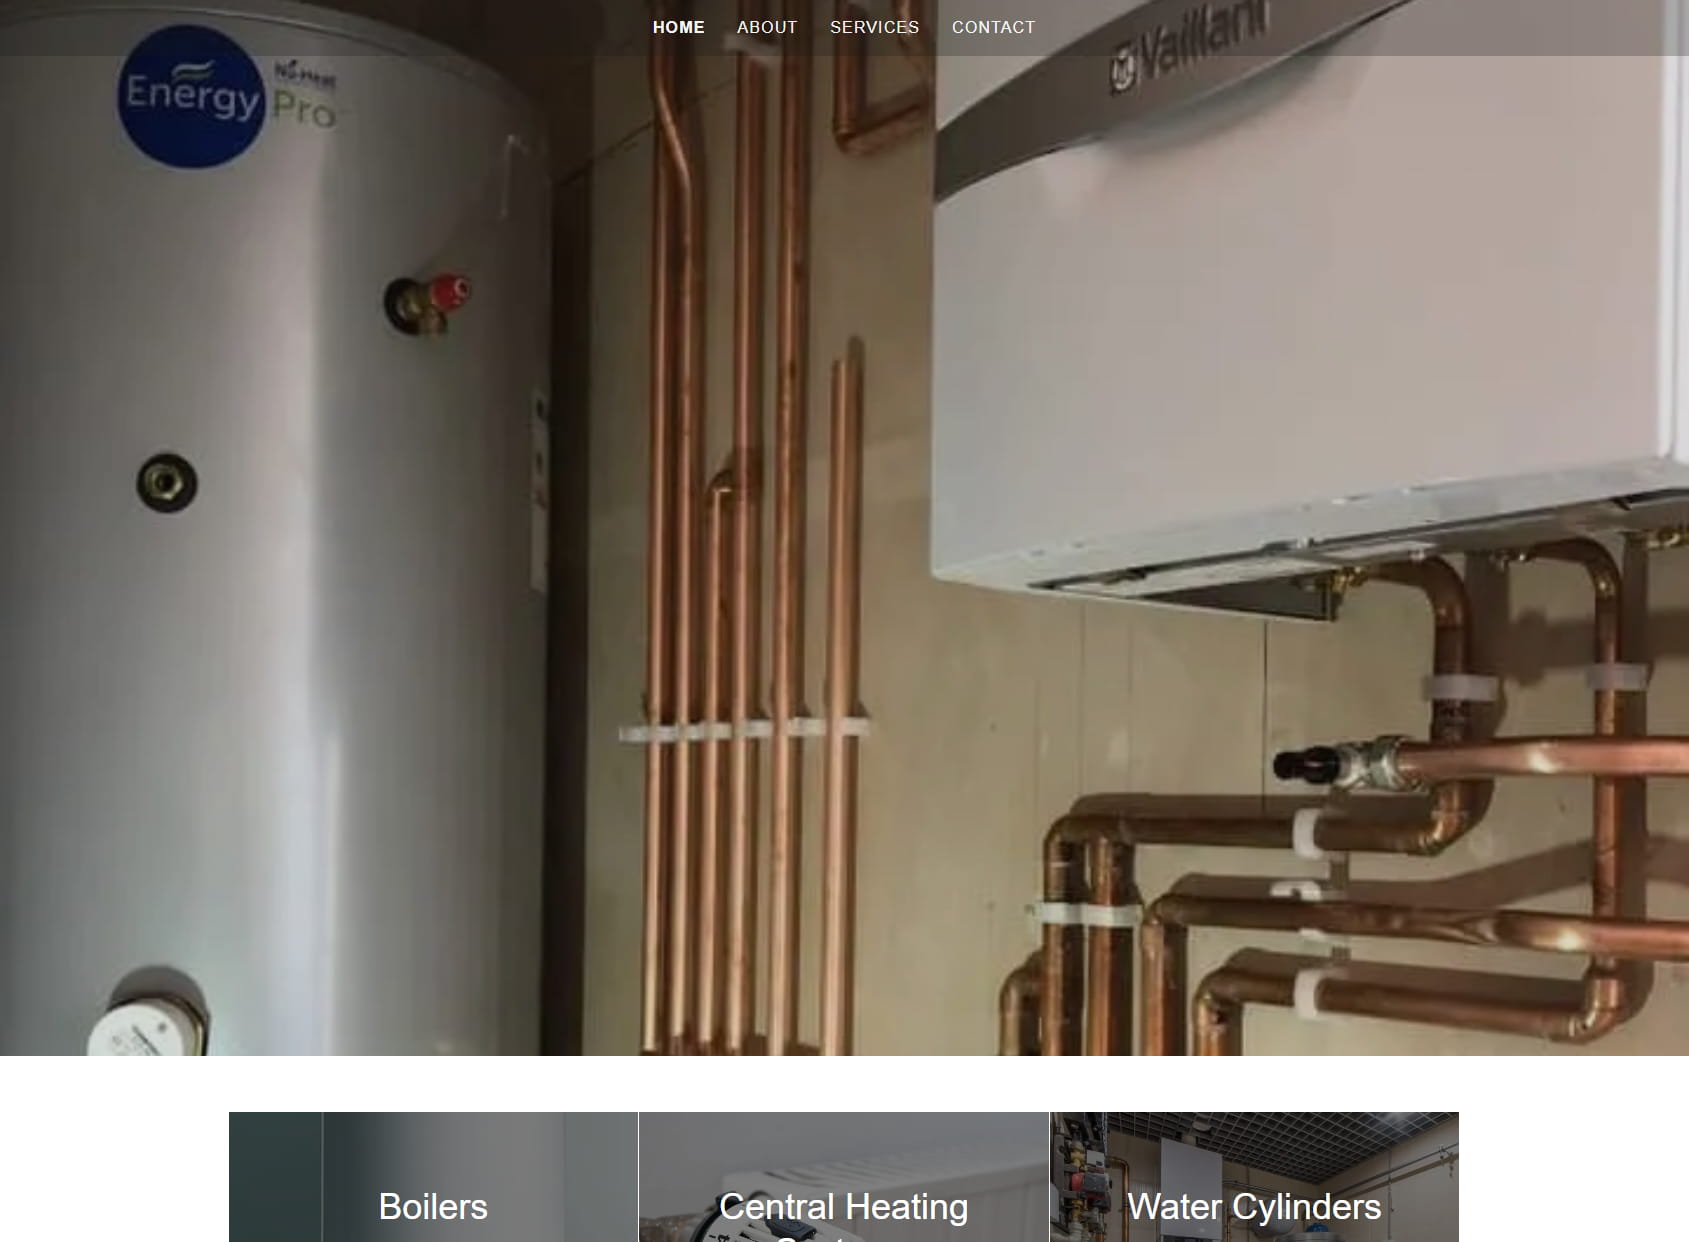 RS Plumbing and Heating